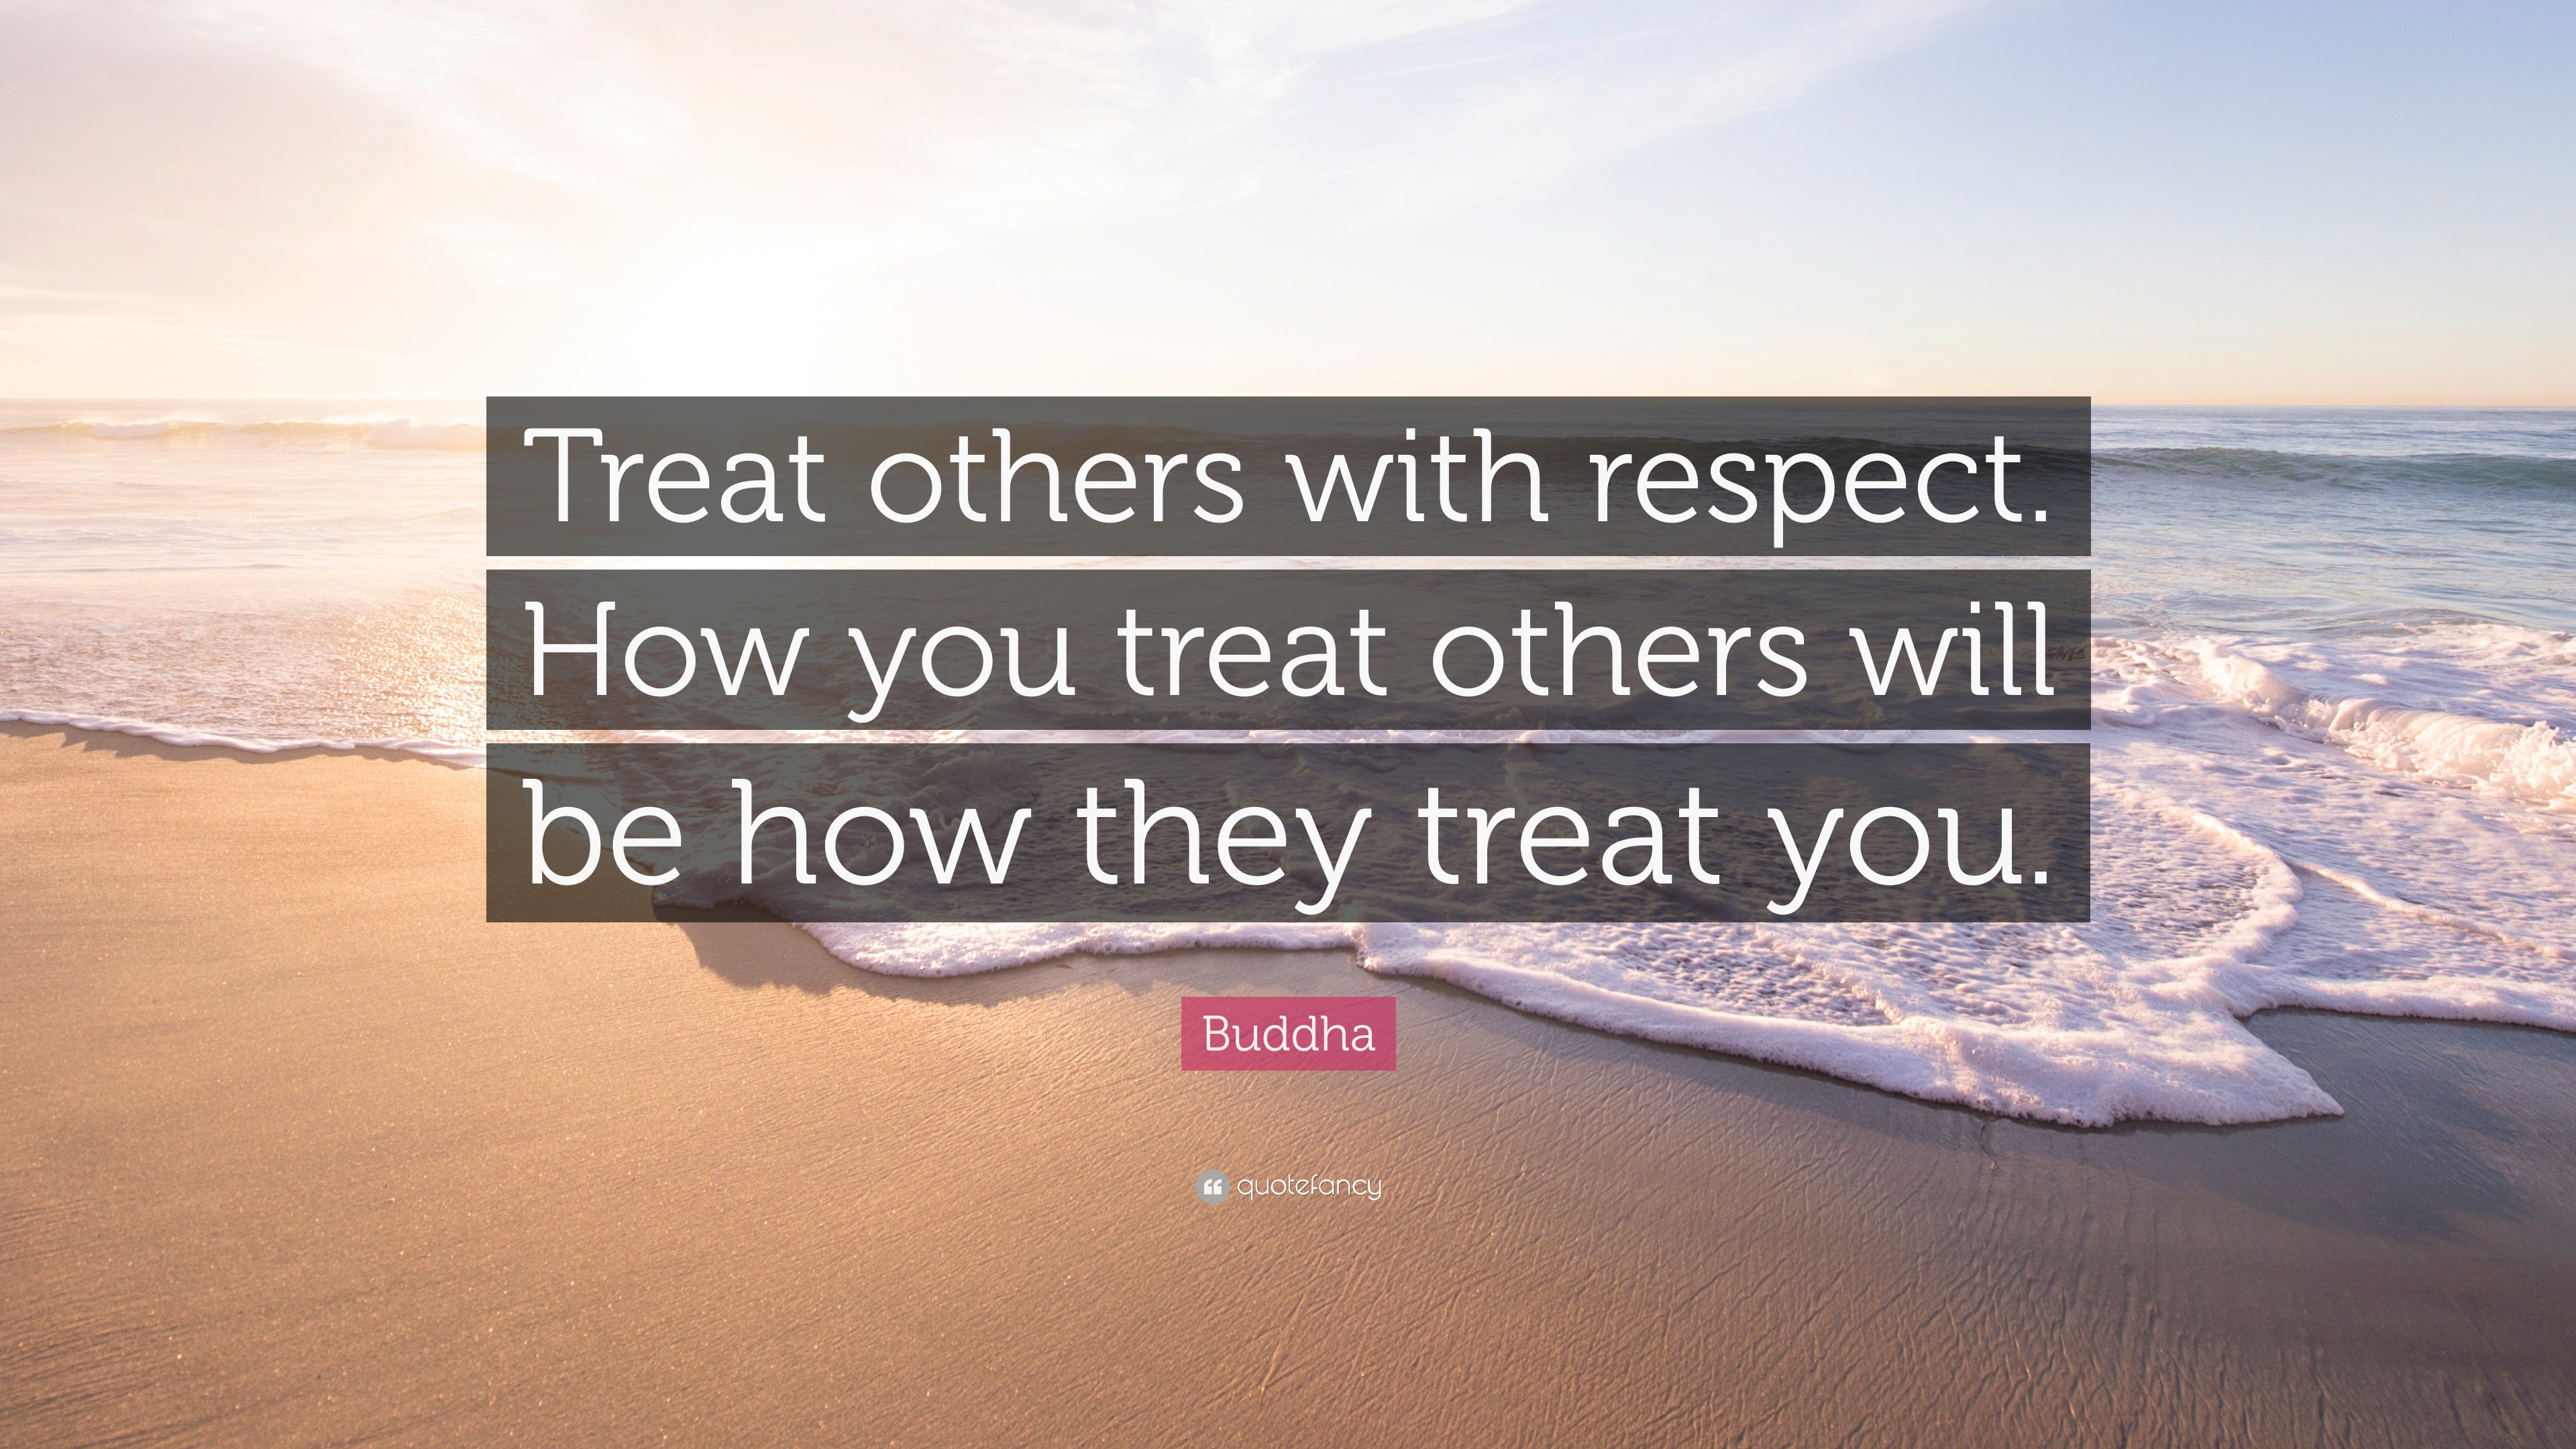 Buddha Quote “Treat others with respect. How you treat